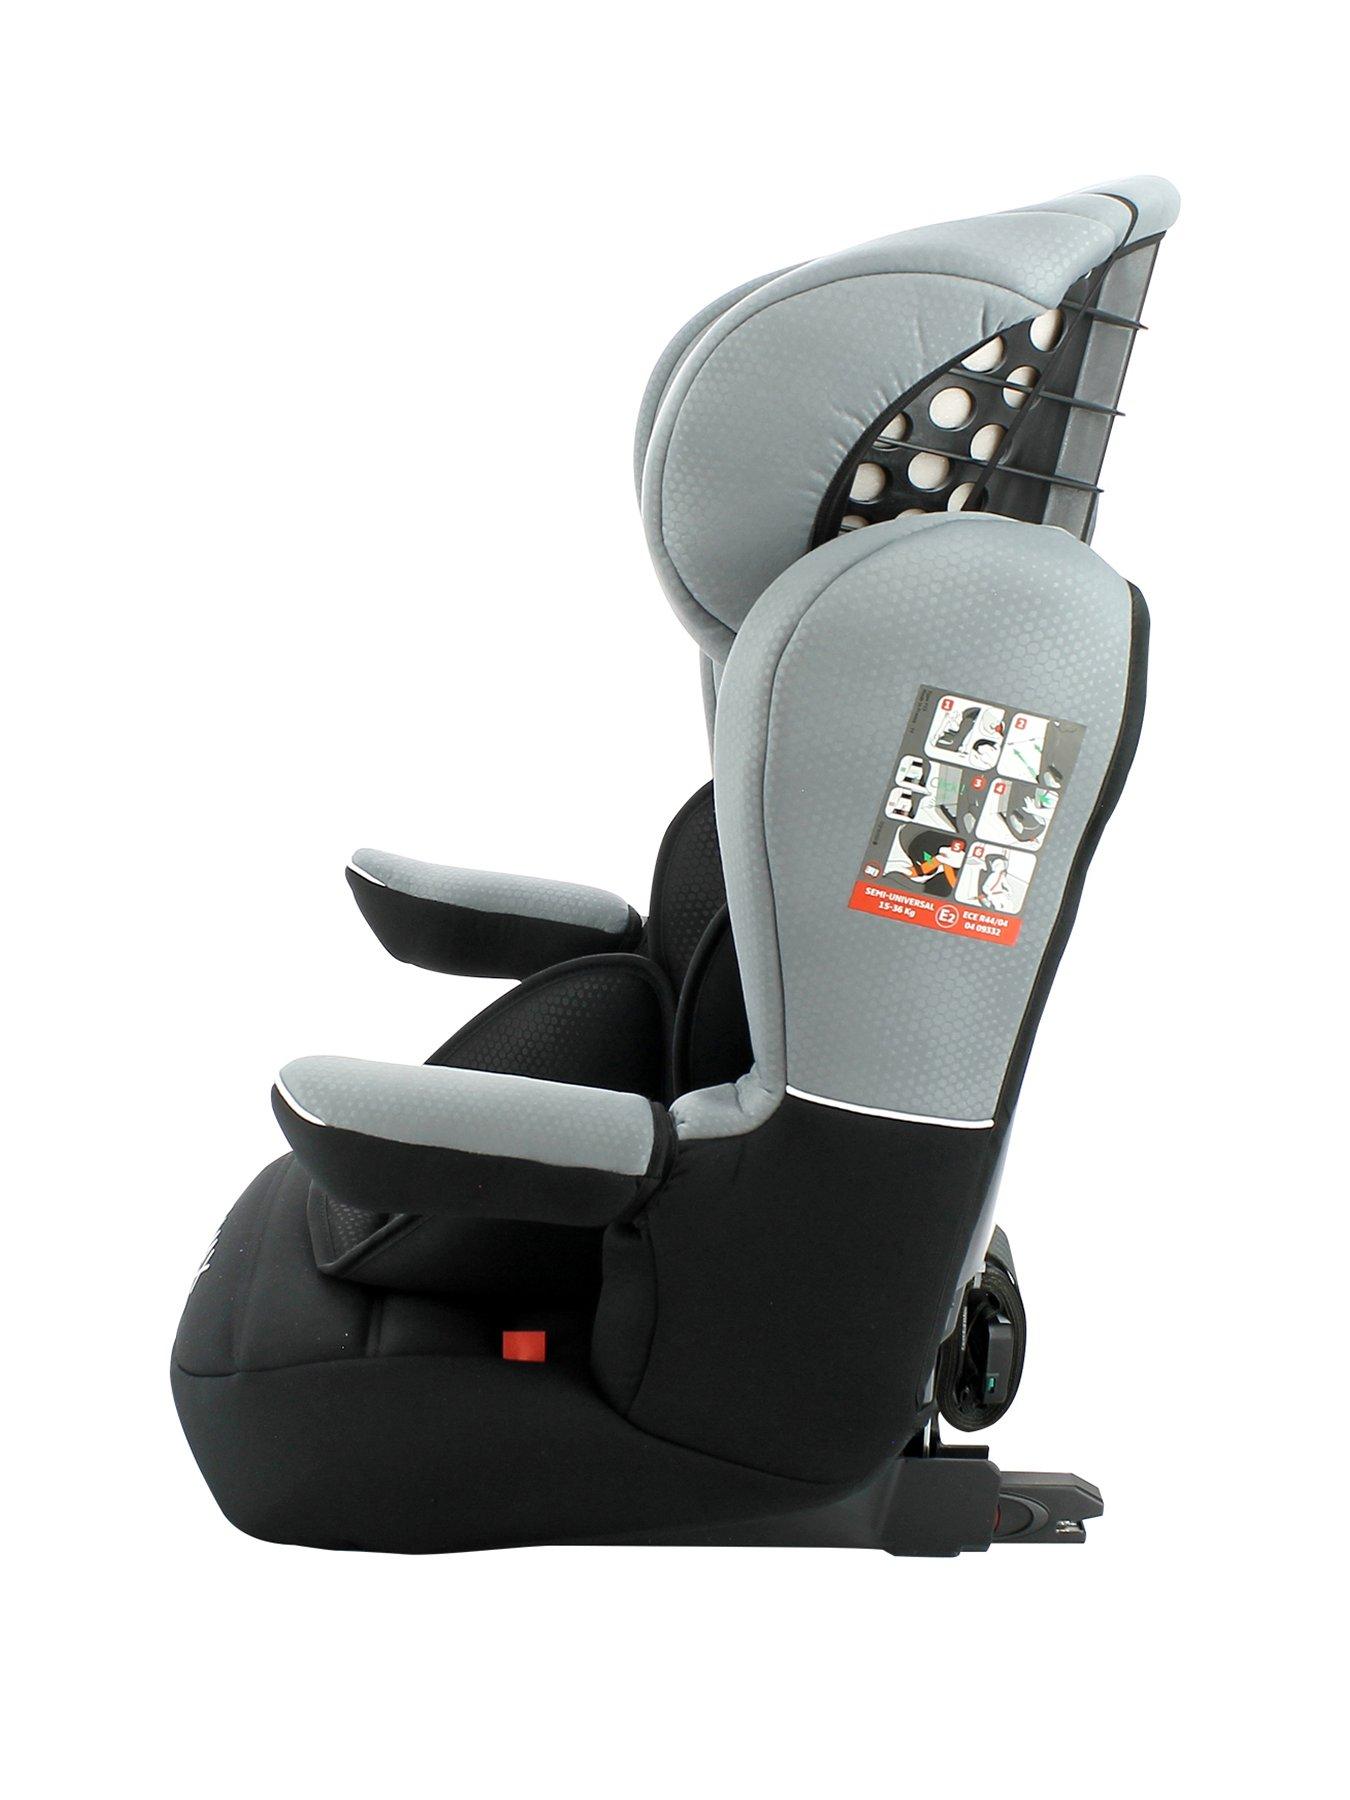 Communicatie netwerk punt Bachelor opleiding Nania Imax SP Luxe Isofix Group 123 High Back Booster Seat | very.co.uk